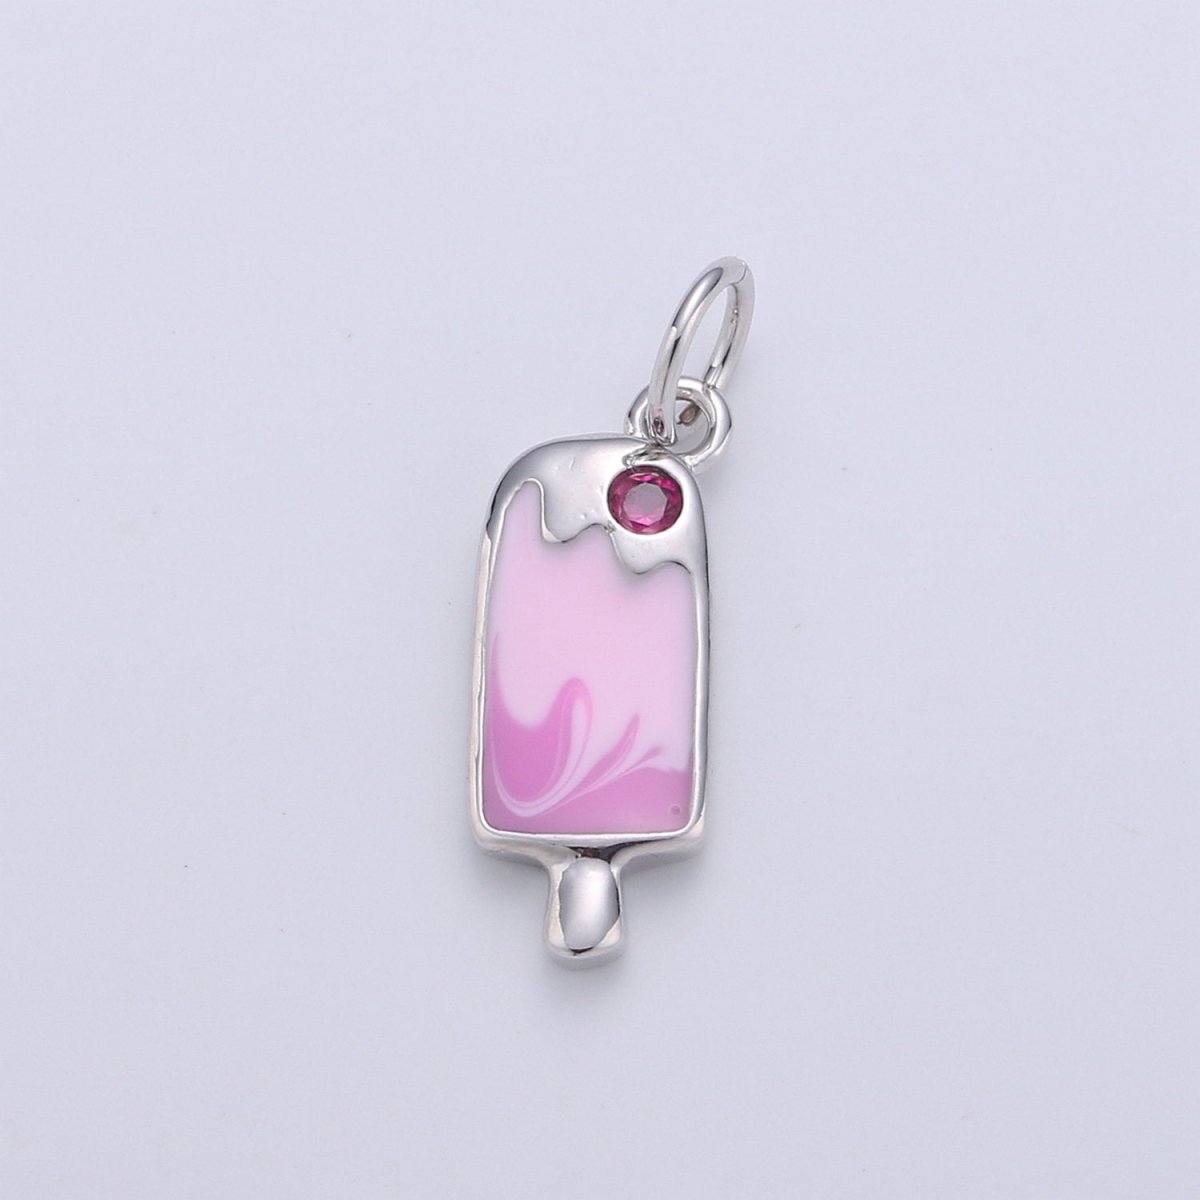 Colorful Ice Cream Charms Enamel Gold Plated for Bracelet Necklace Earring Component Summer Jewelry D-258 D-259 - DLUXCA